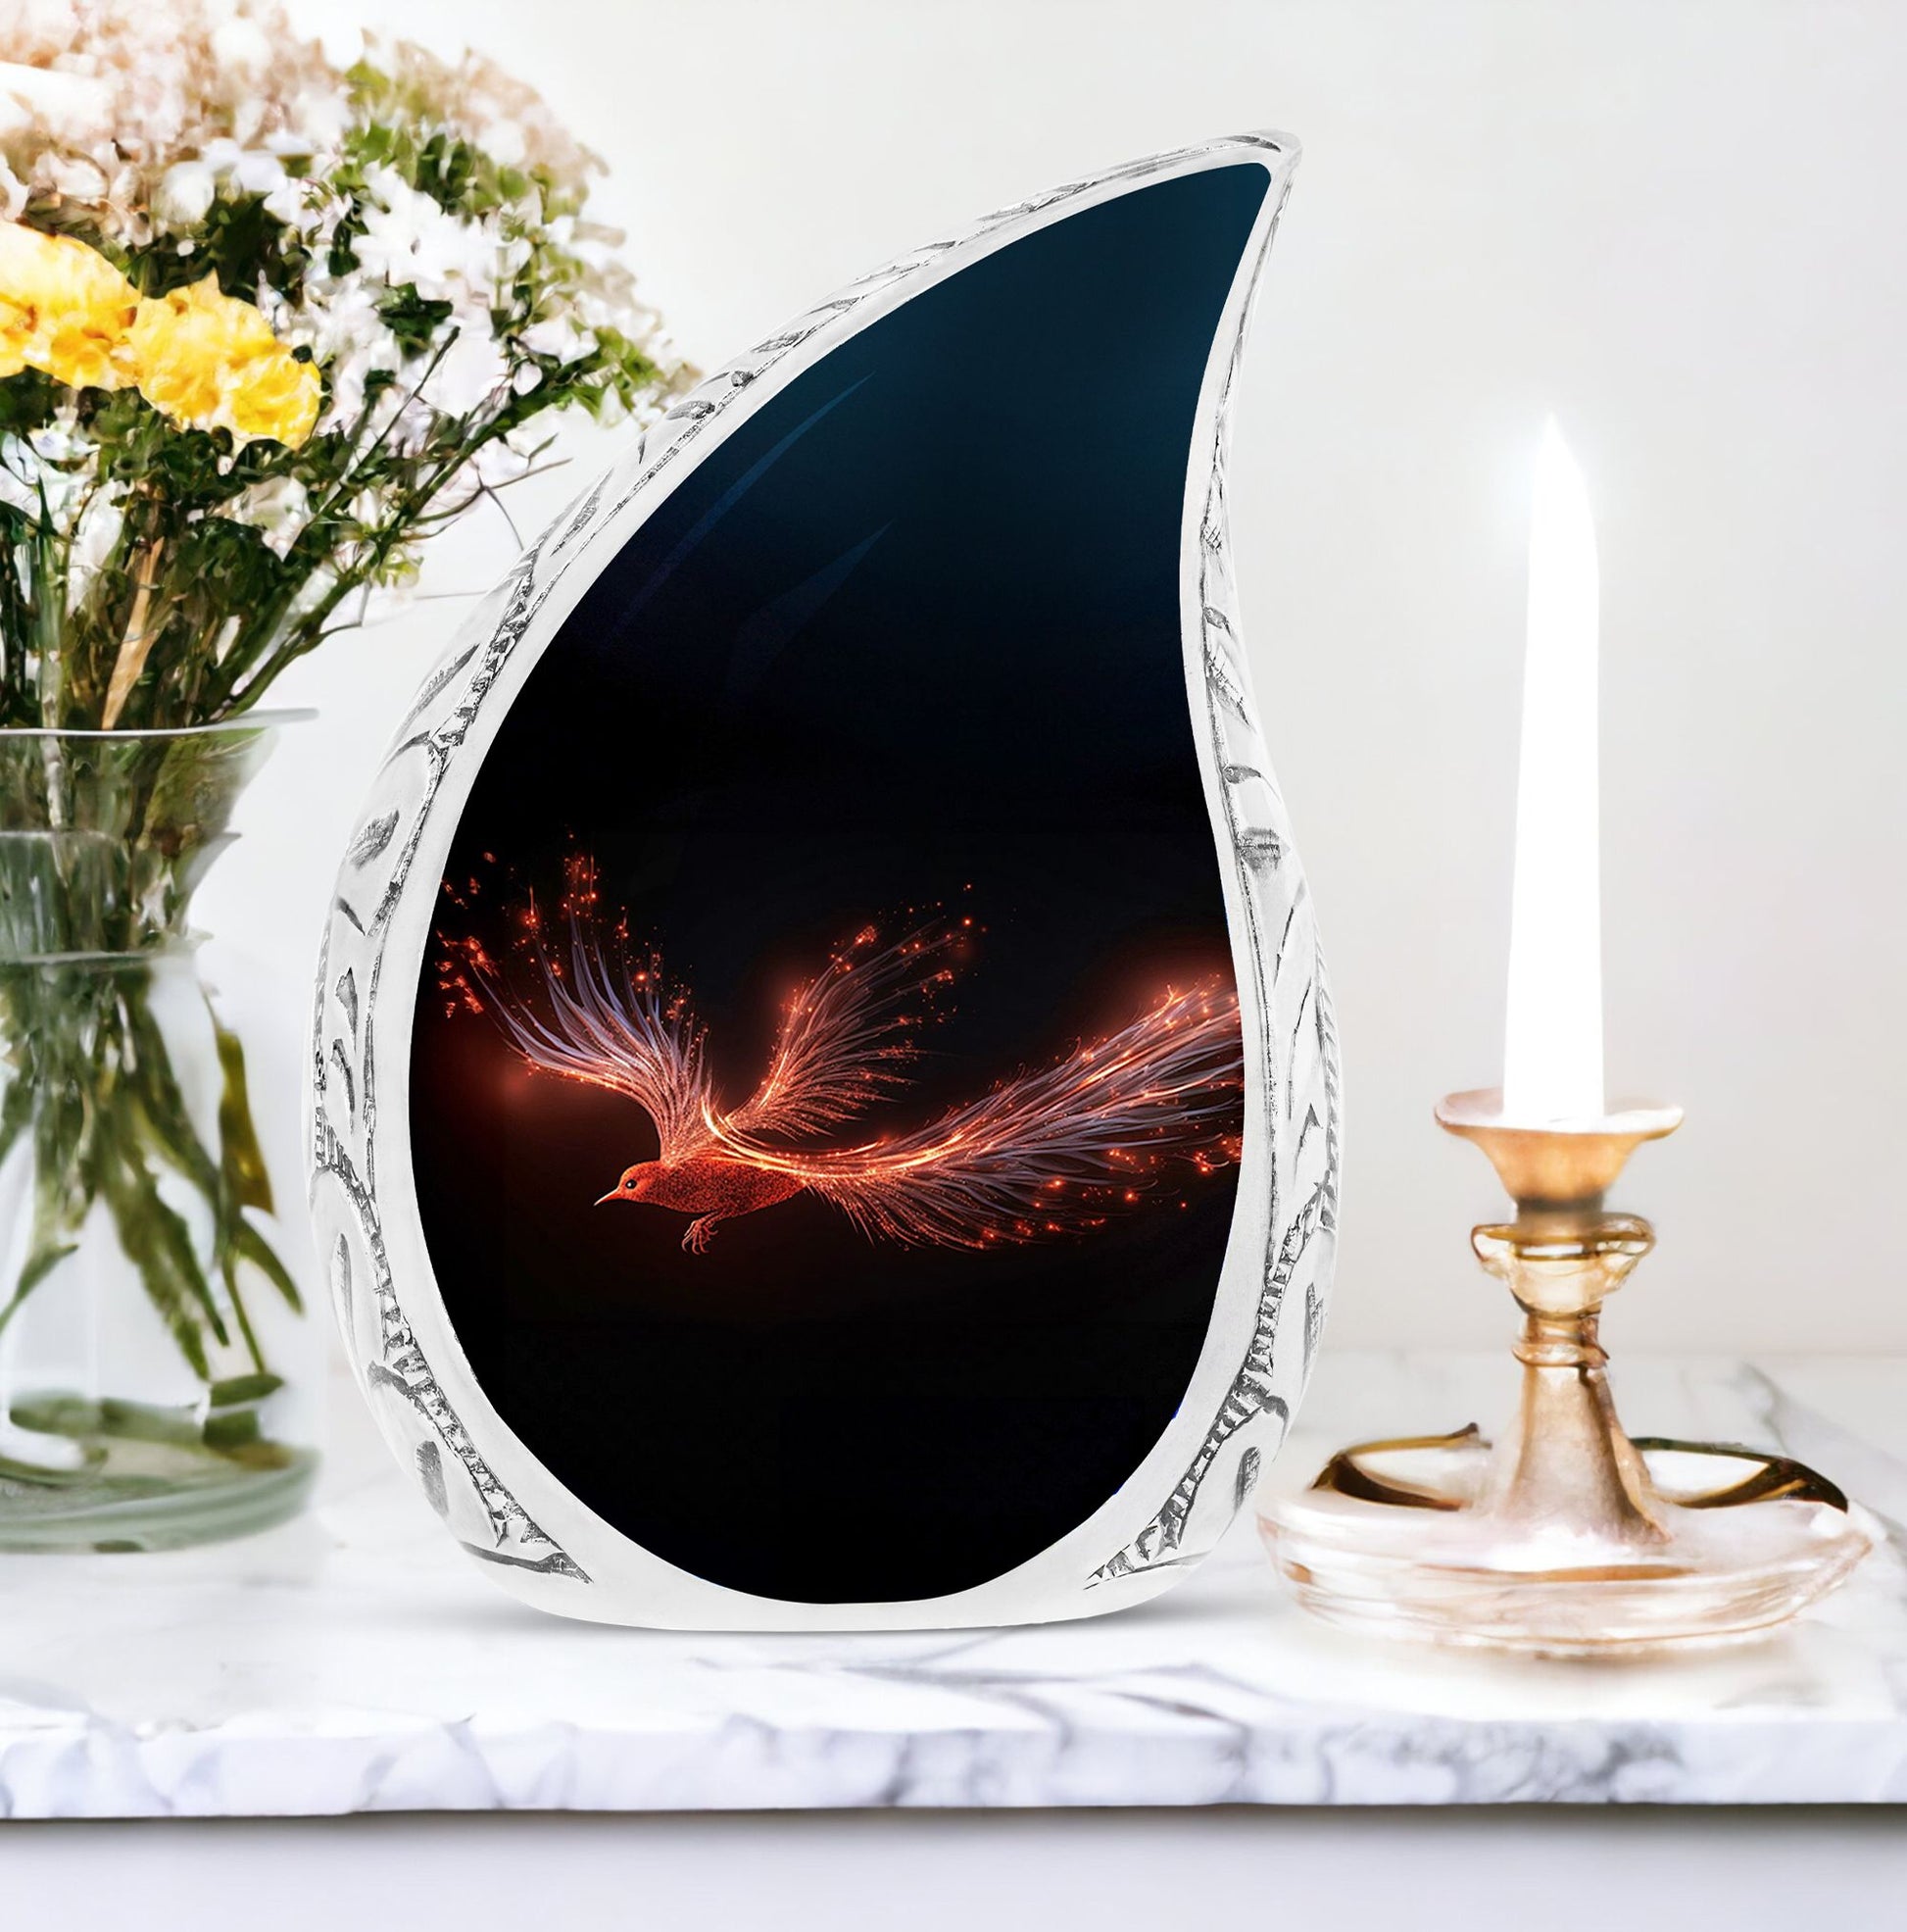 Large Red Sparrow themed cremation urn for human ashes, suitable for adult women